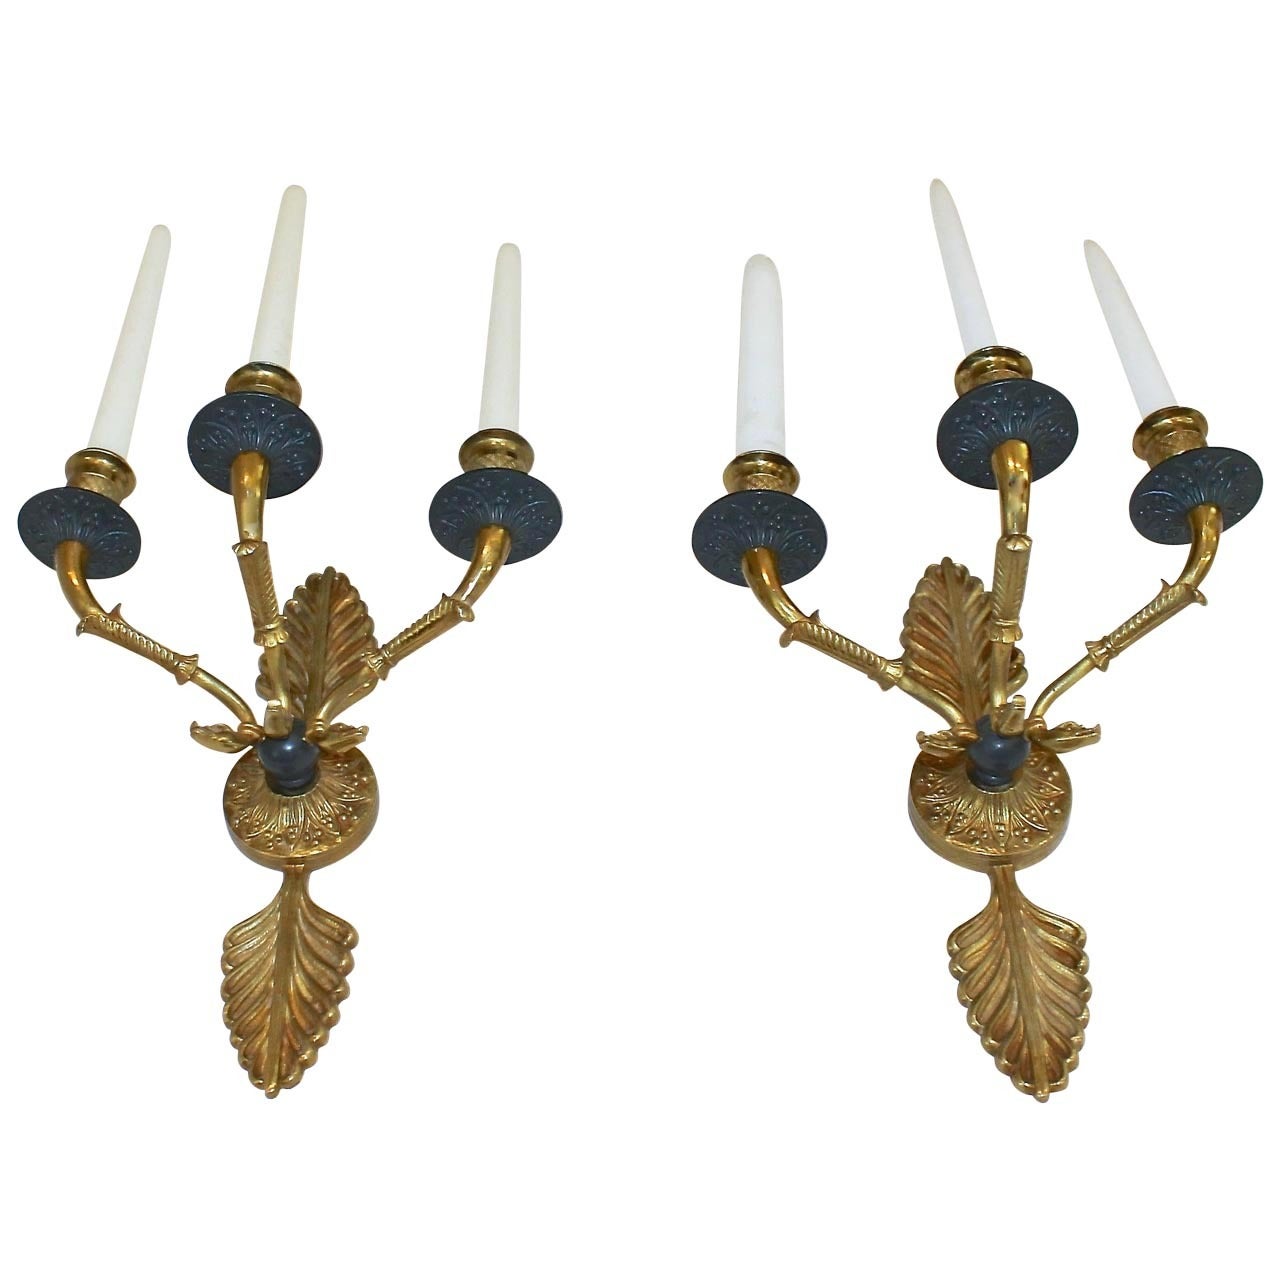 Pair of French Empire Style Doré Wall Sconces For Sale